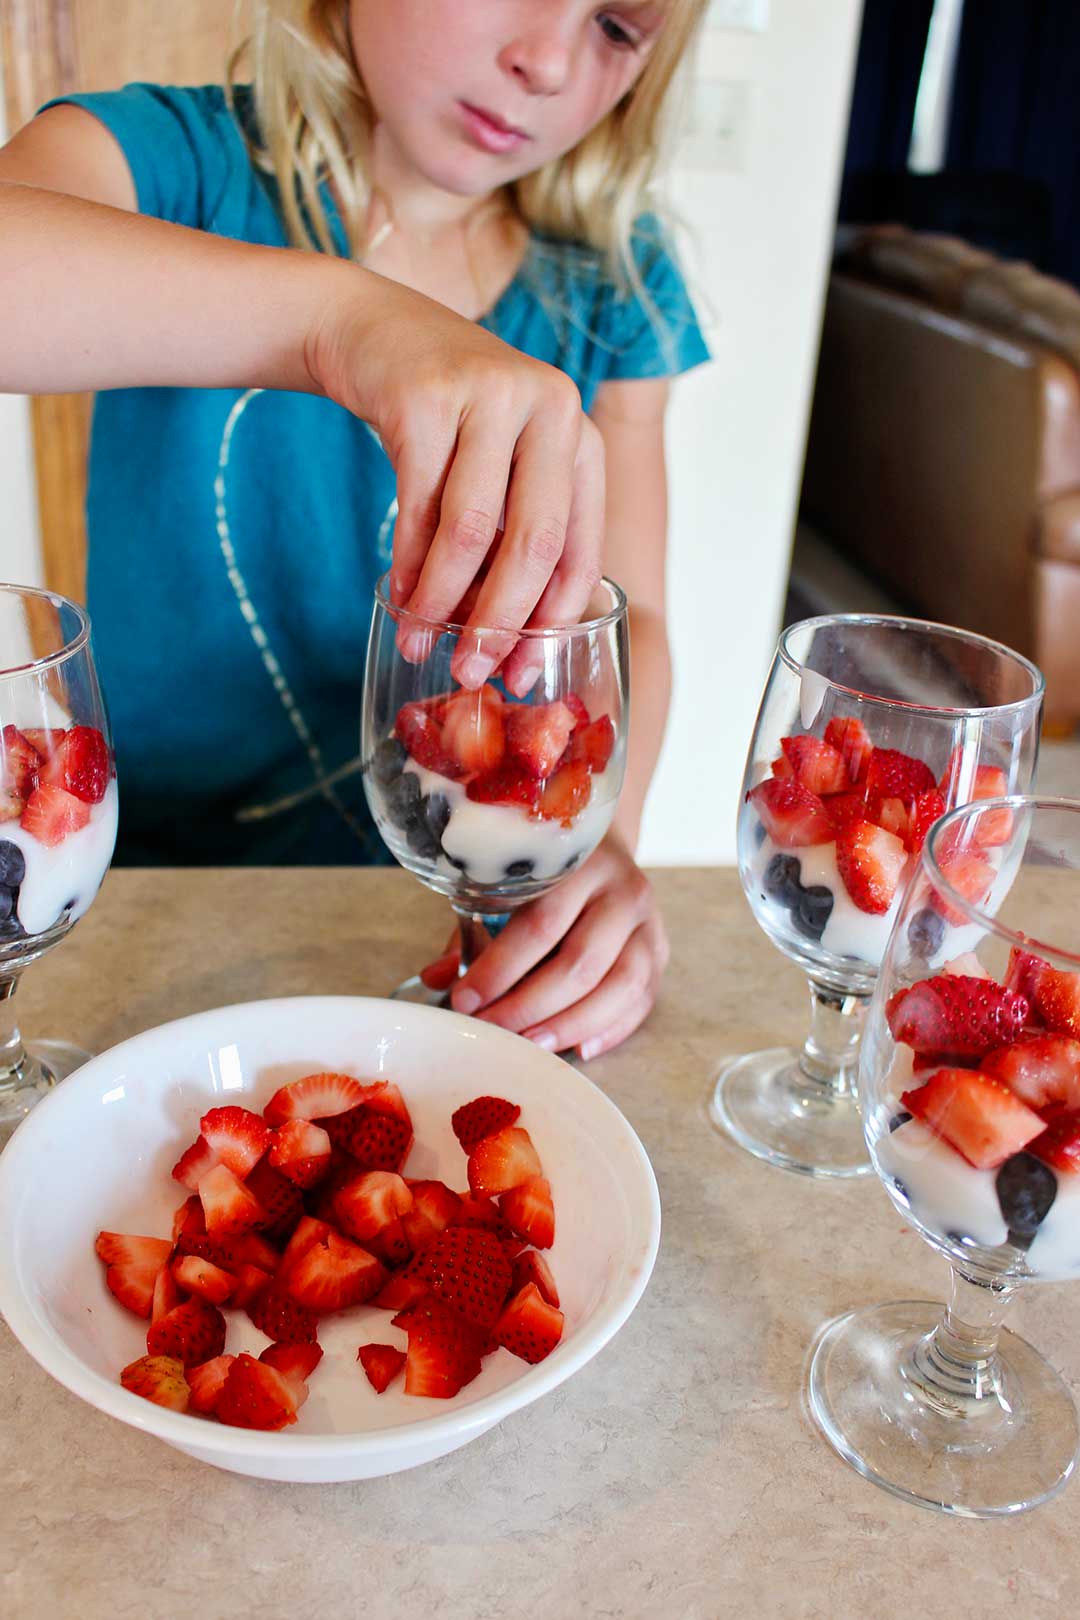 A child adding sliced strawberries to glass cups with blueberries and yogurt.